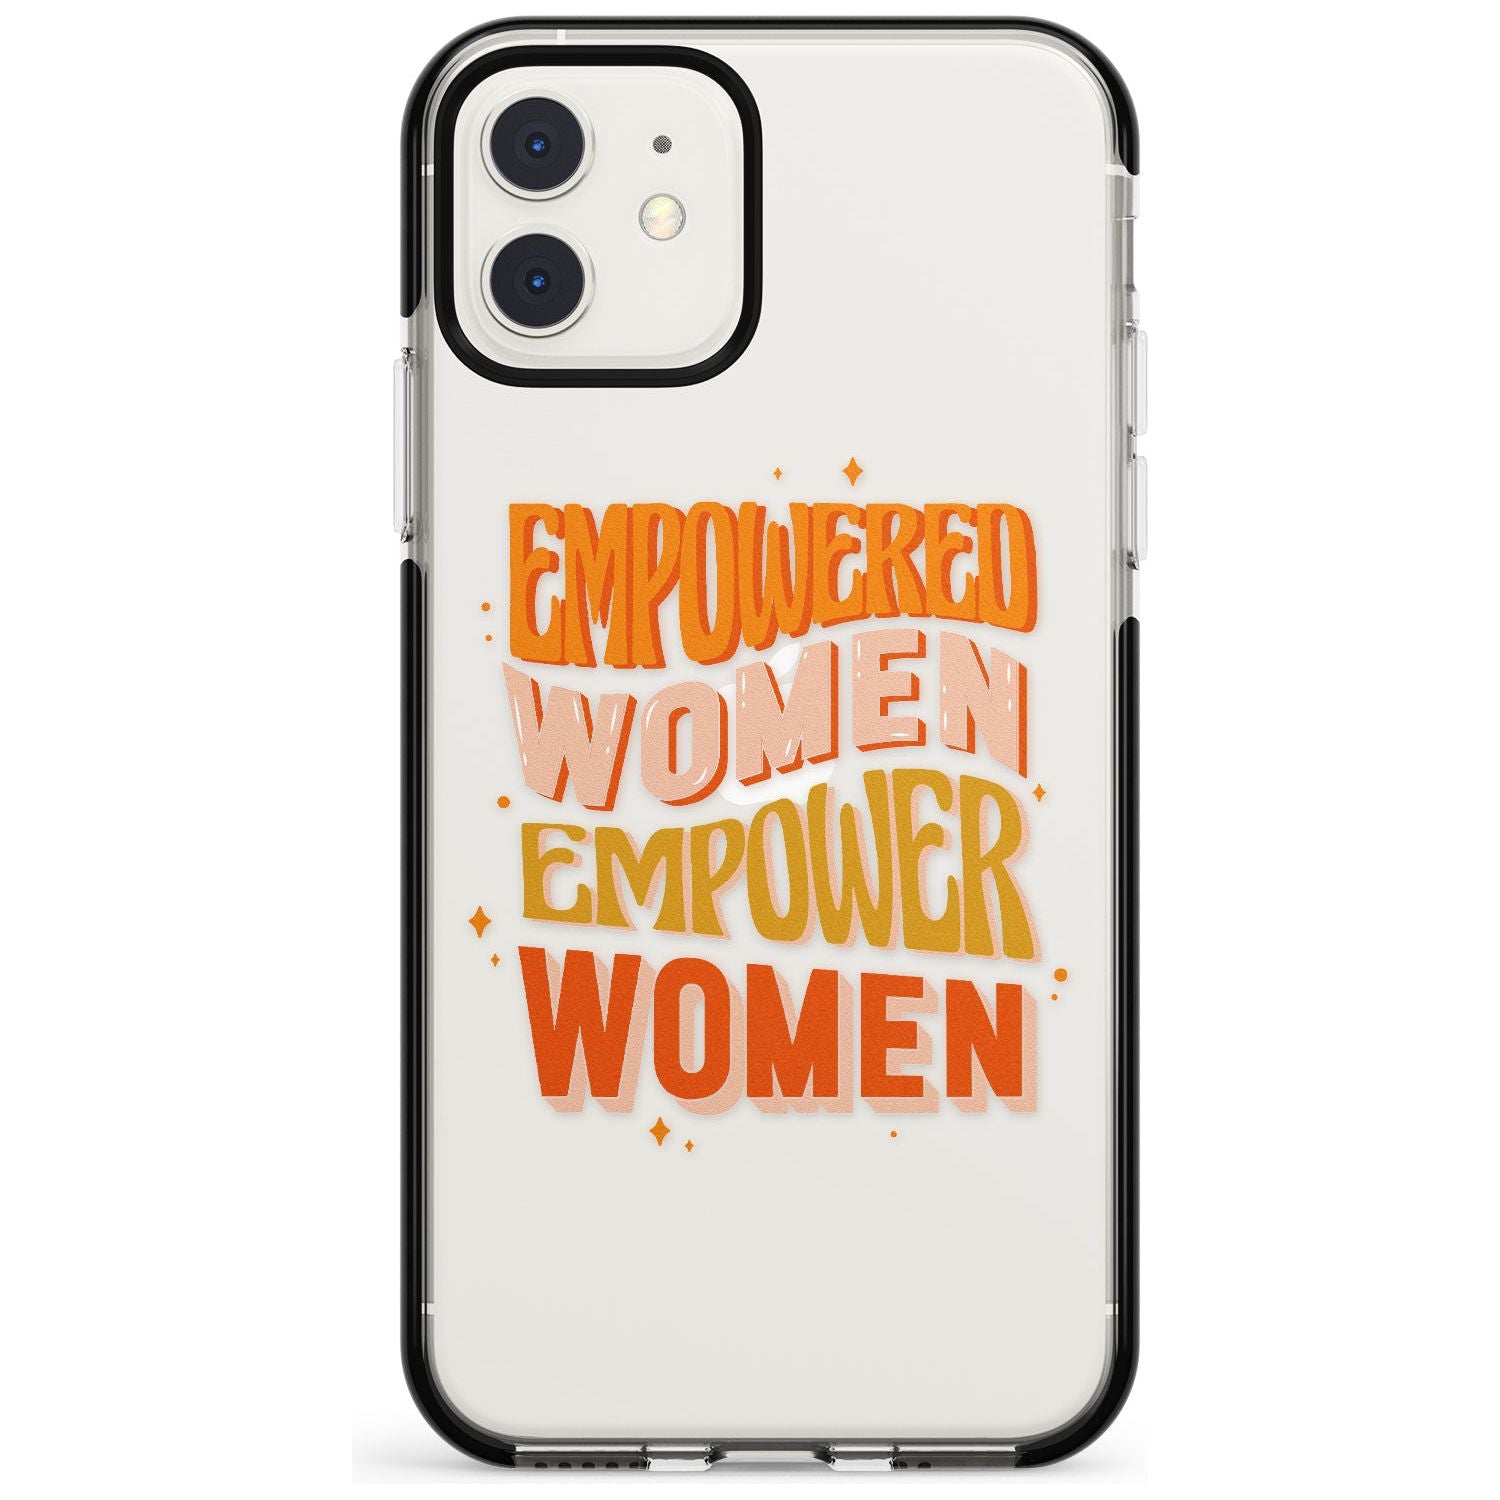 Empowered Women Black Impact Phone Case for iPhone 11